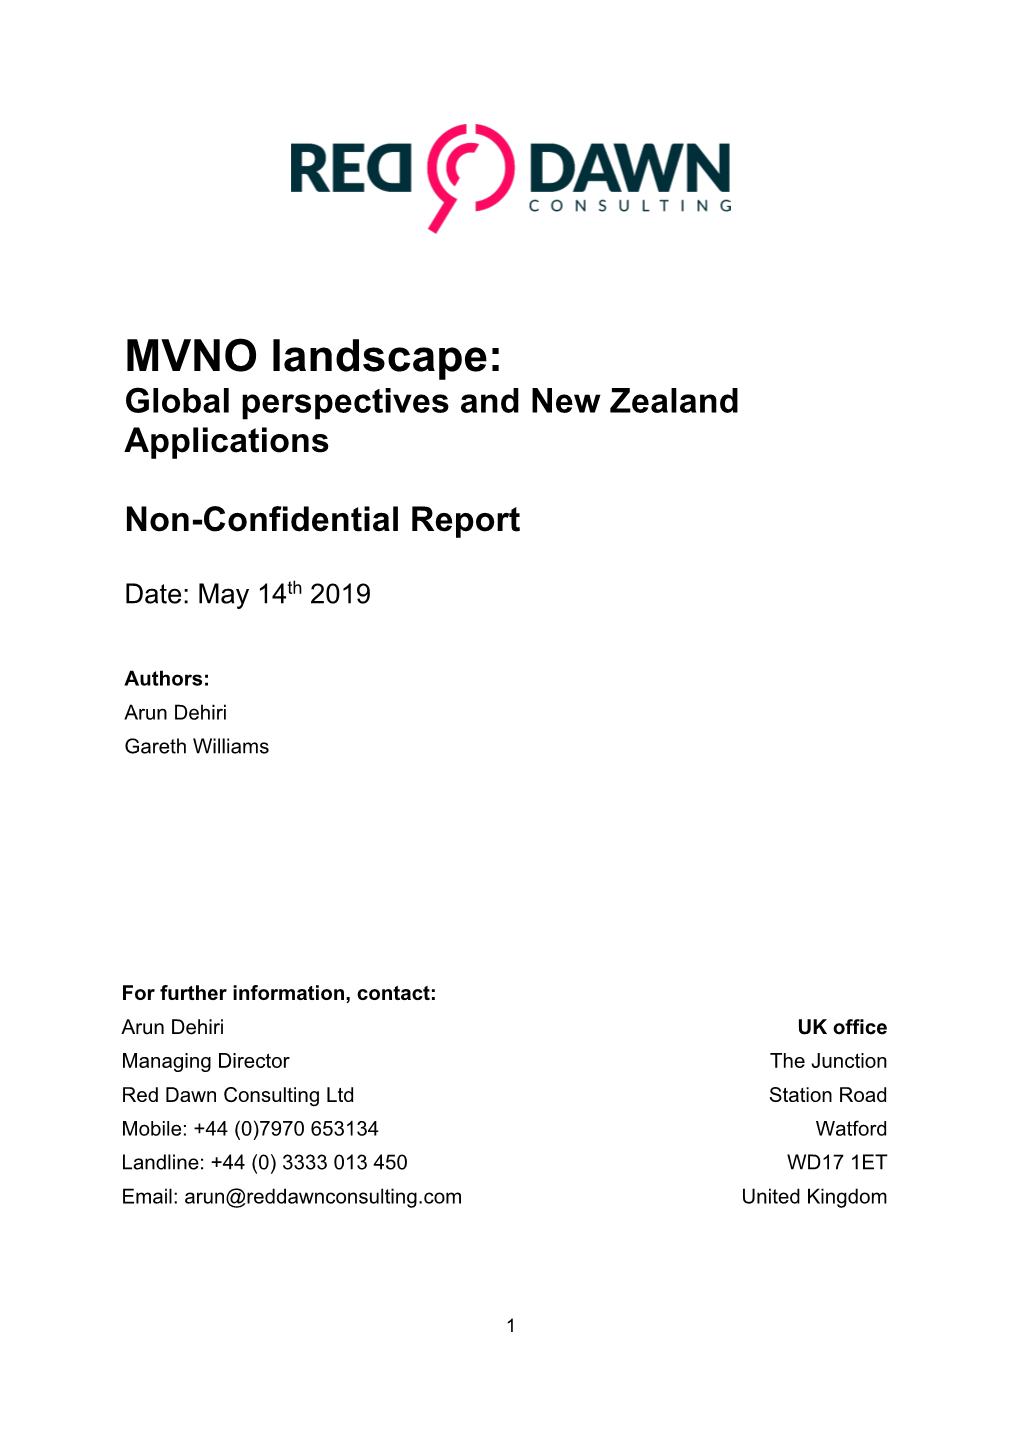 MVNO Landscape: Global Perspectives and New Zealand Applications